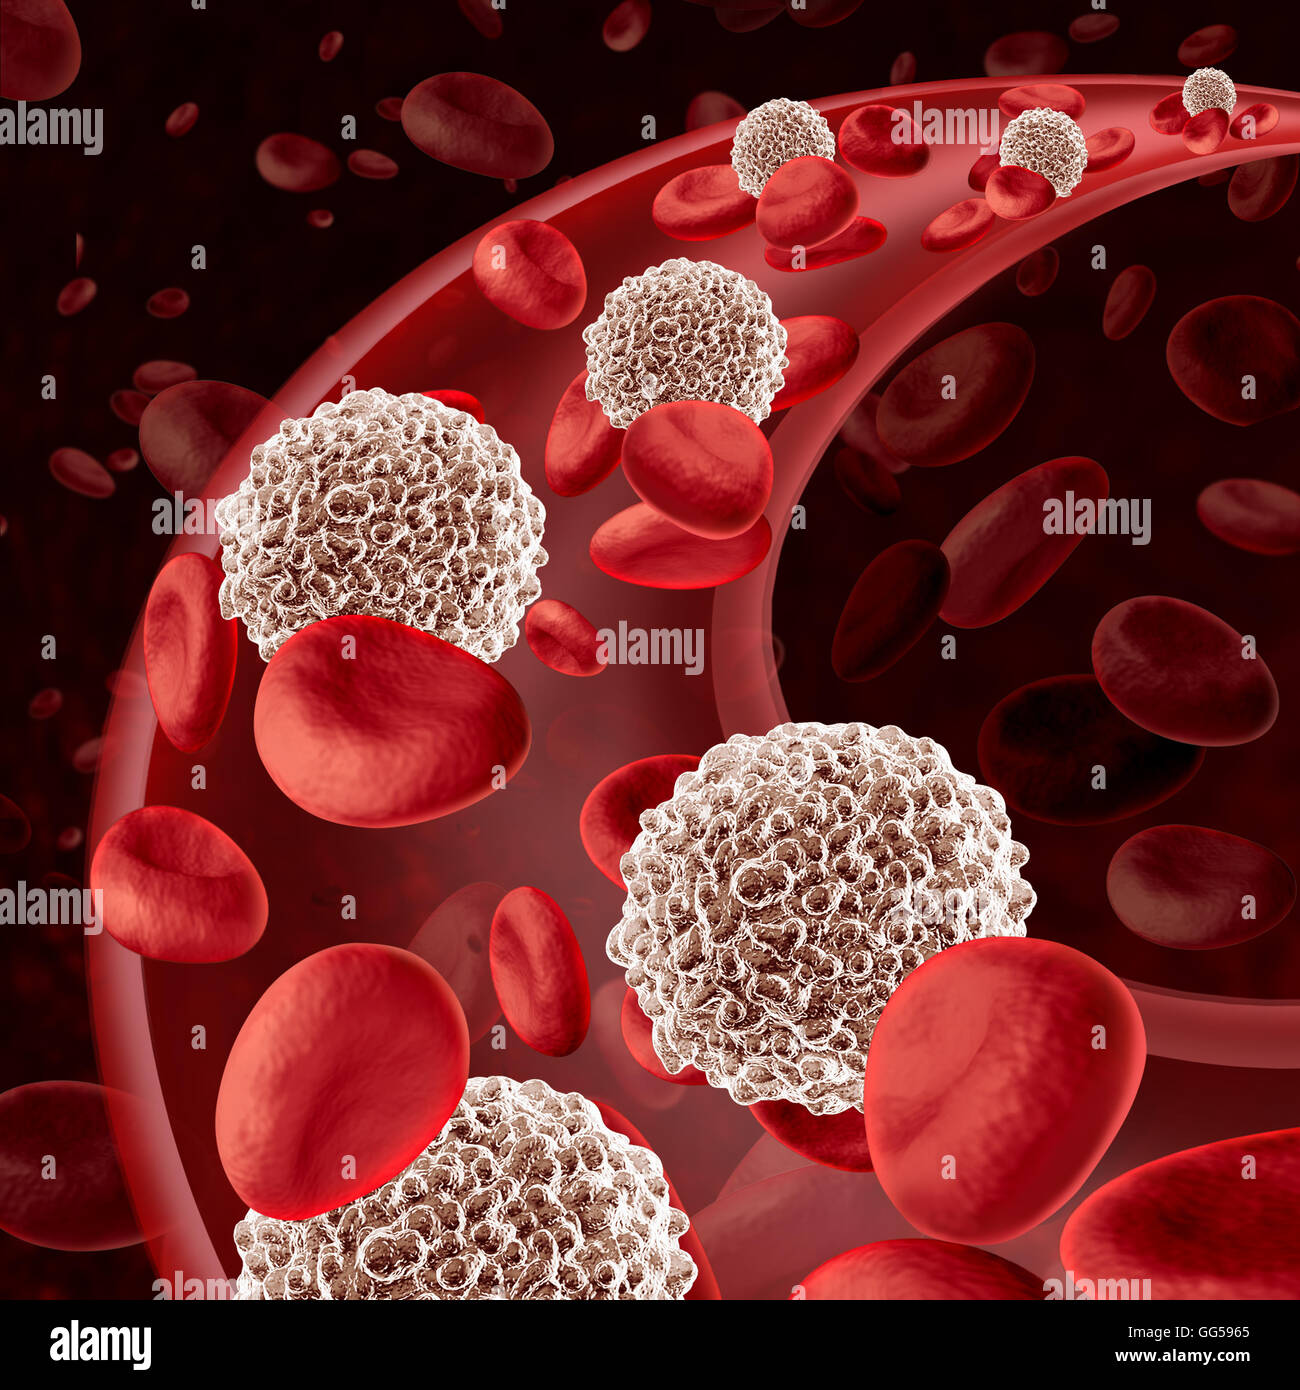 White blood cell circulation flowing through as a microbiology defense symbol of the human immune system fighting off infections defending and protecting the human body from infectious disease as a 3D illustration. Stock Photo